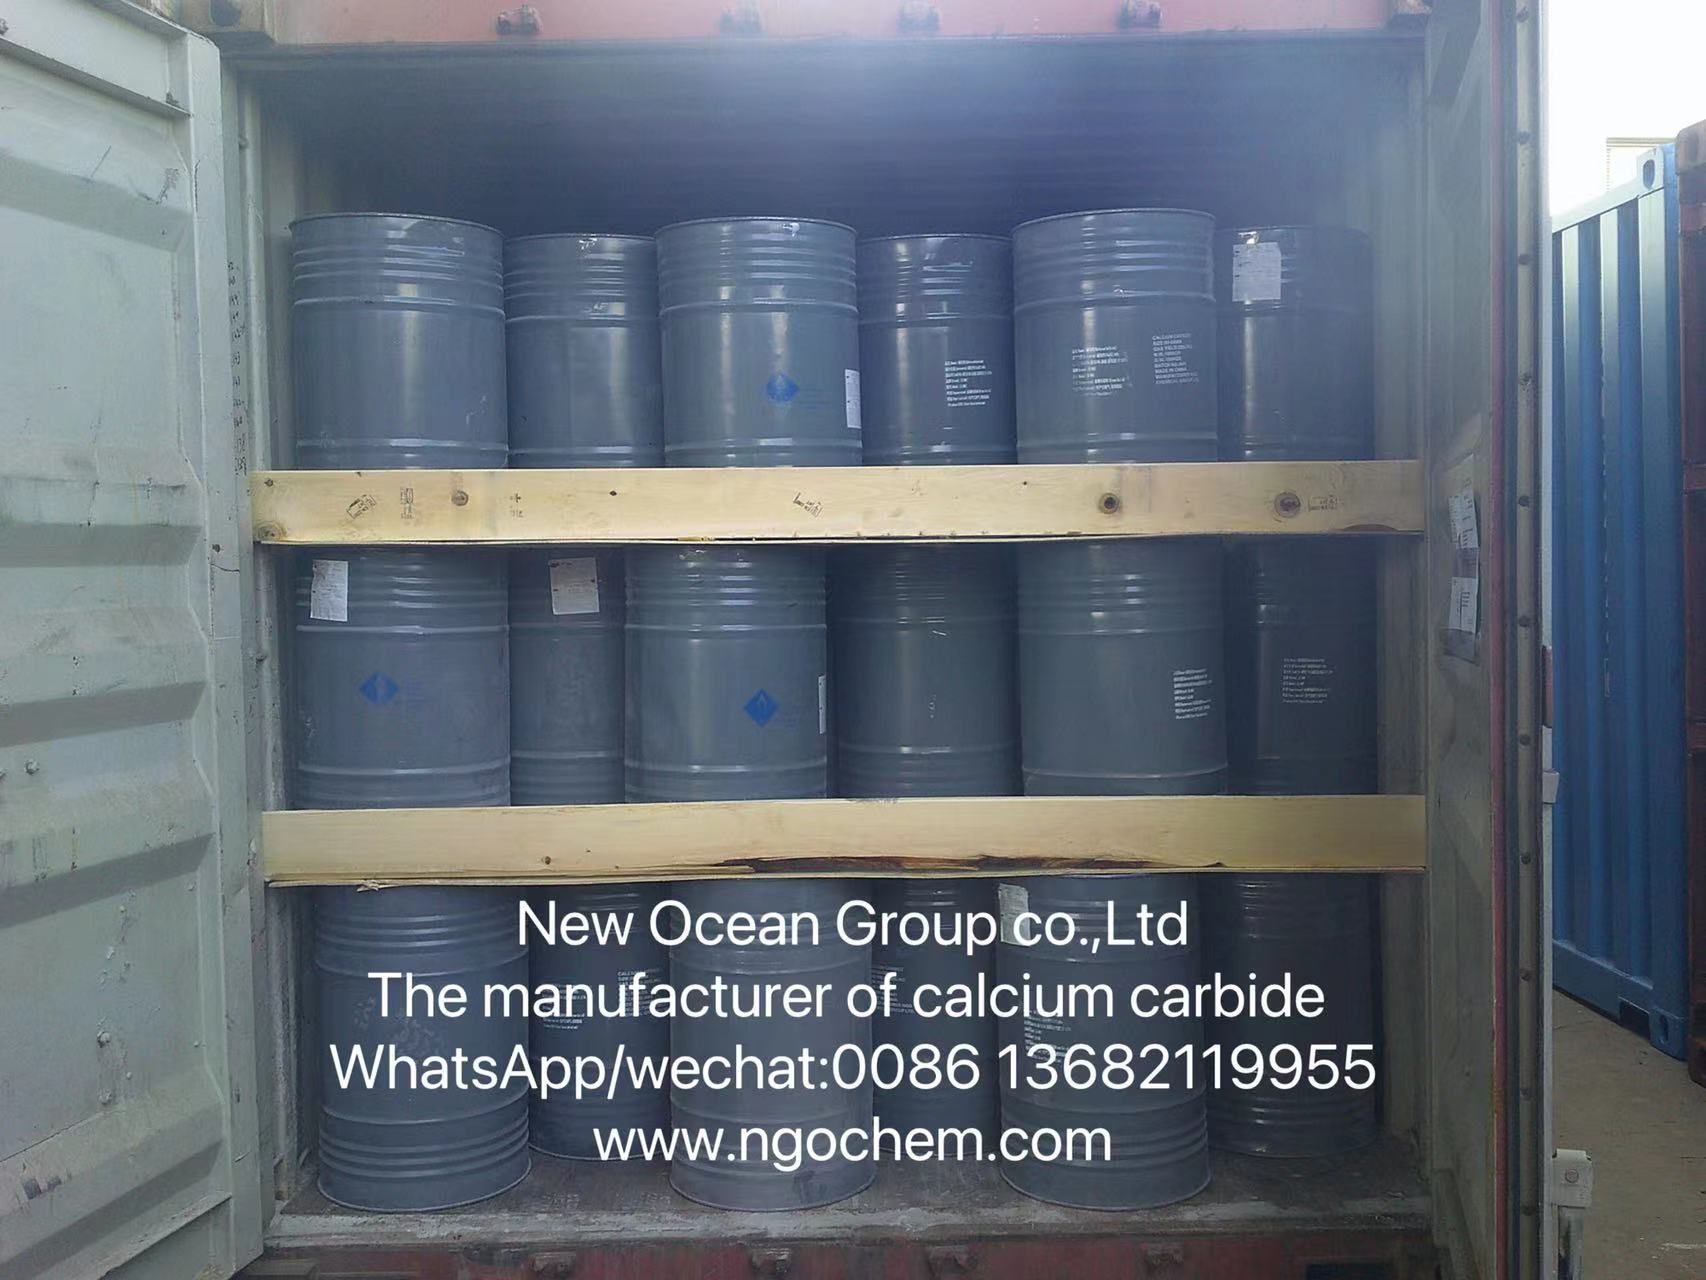 On November 16, the factory price of northwest calcium carbide was temporarily stable